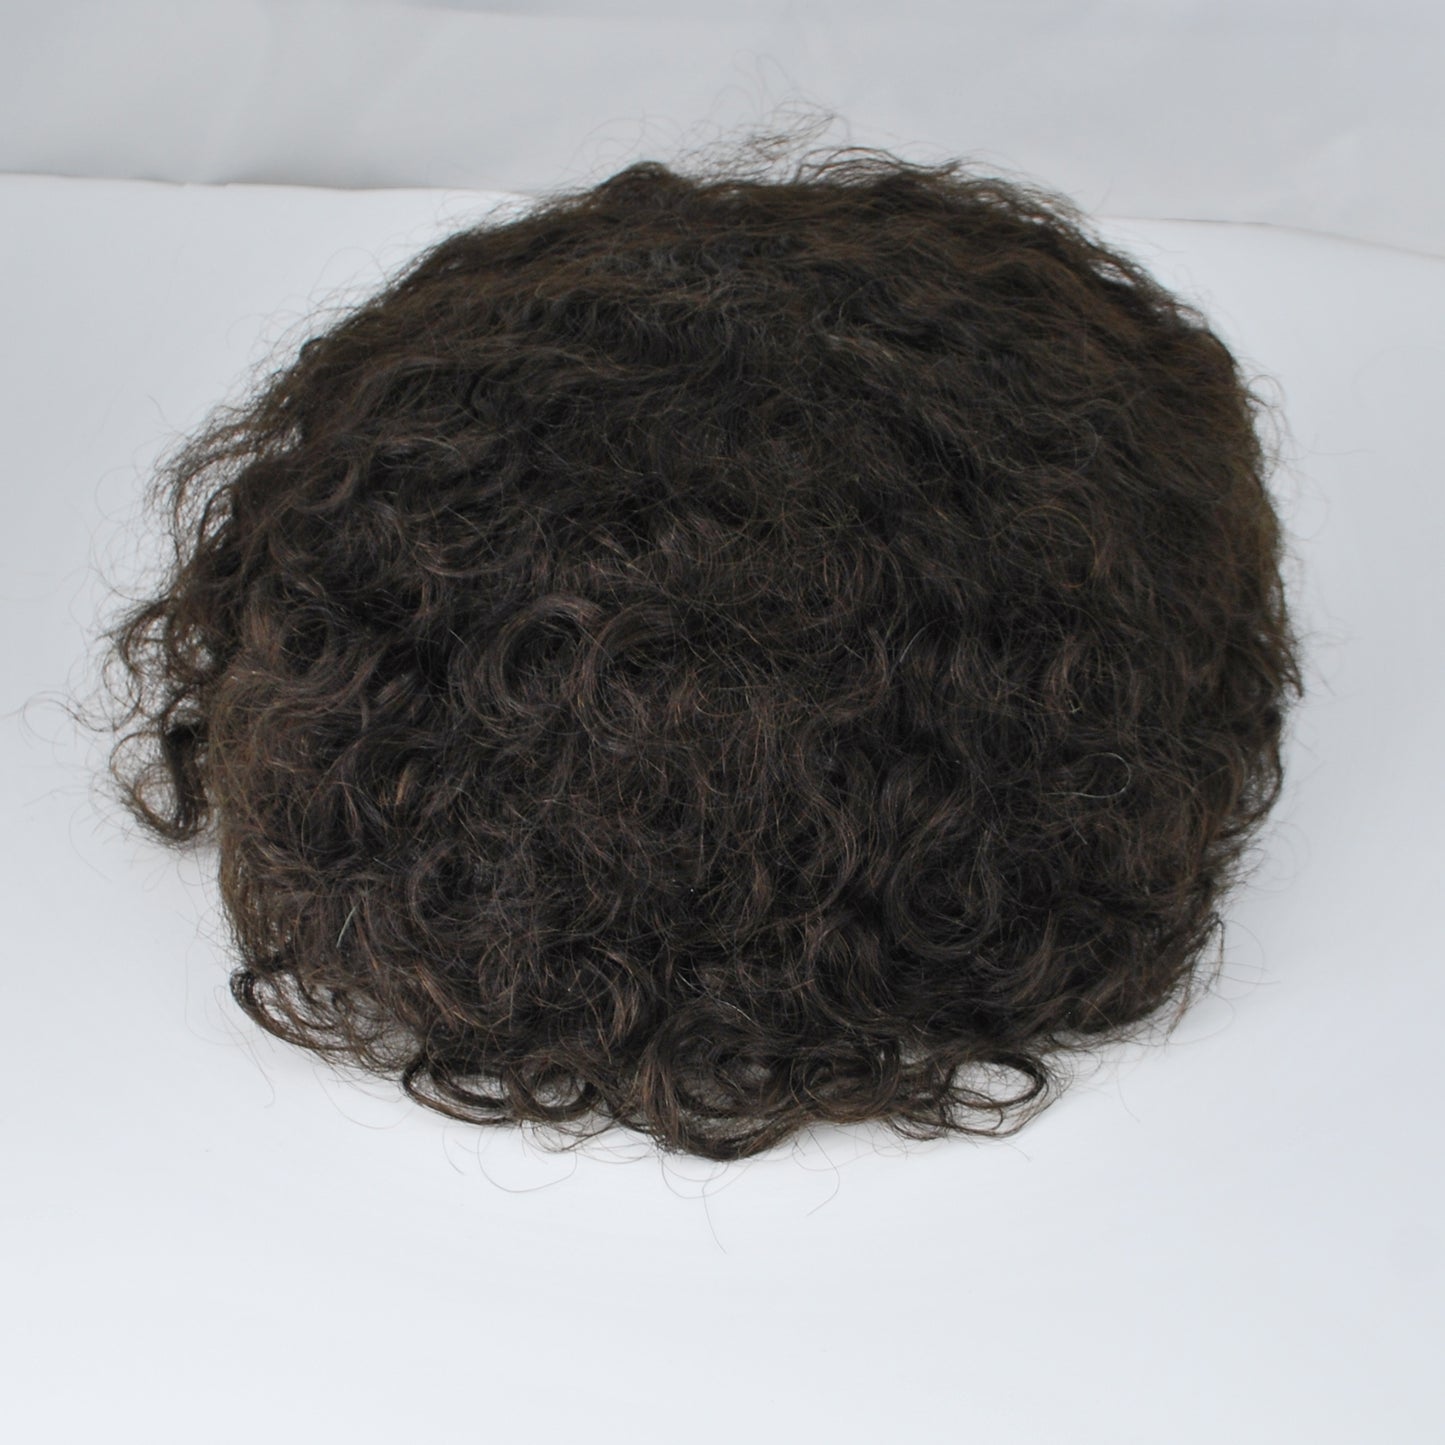 Clearance men hair system 1.4 cm curly toupee #2 dark brown all French lace hair replacement